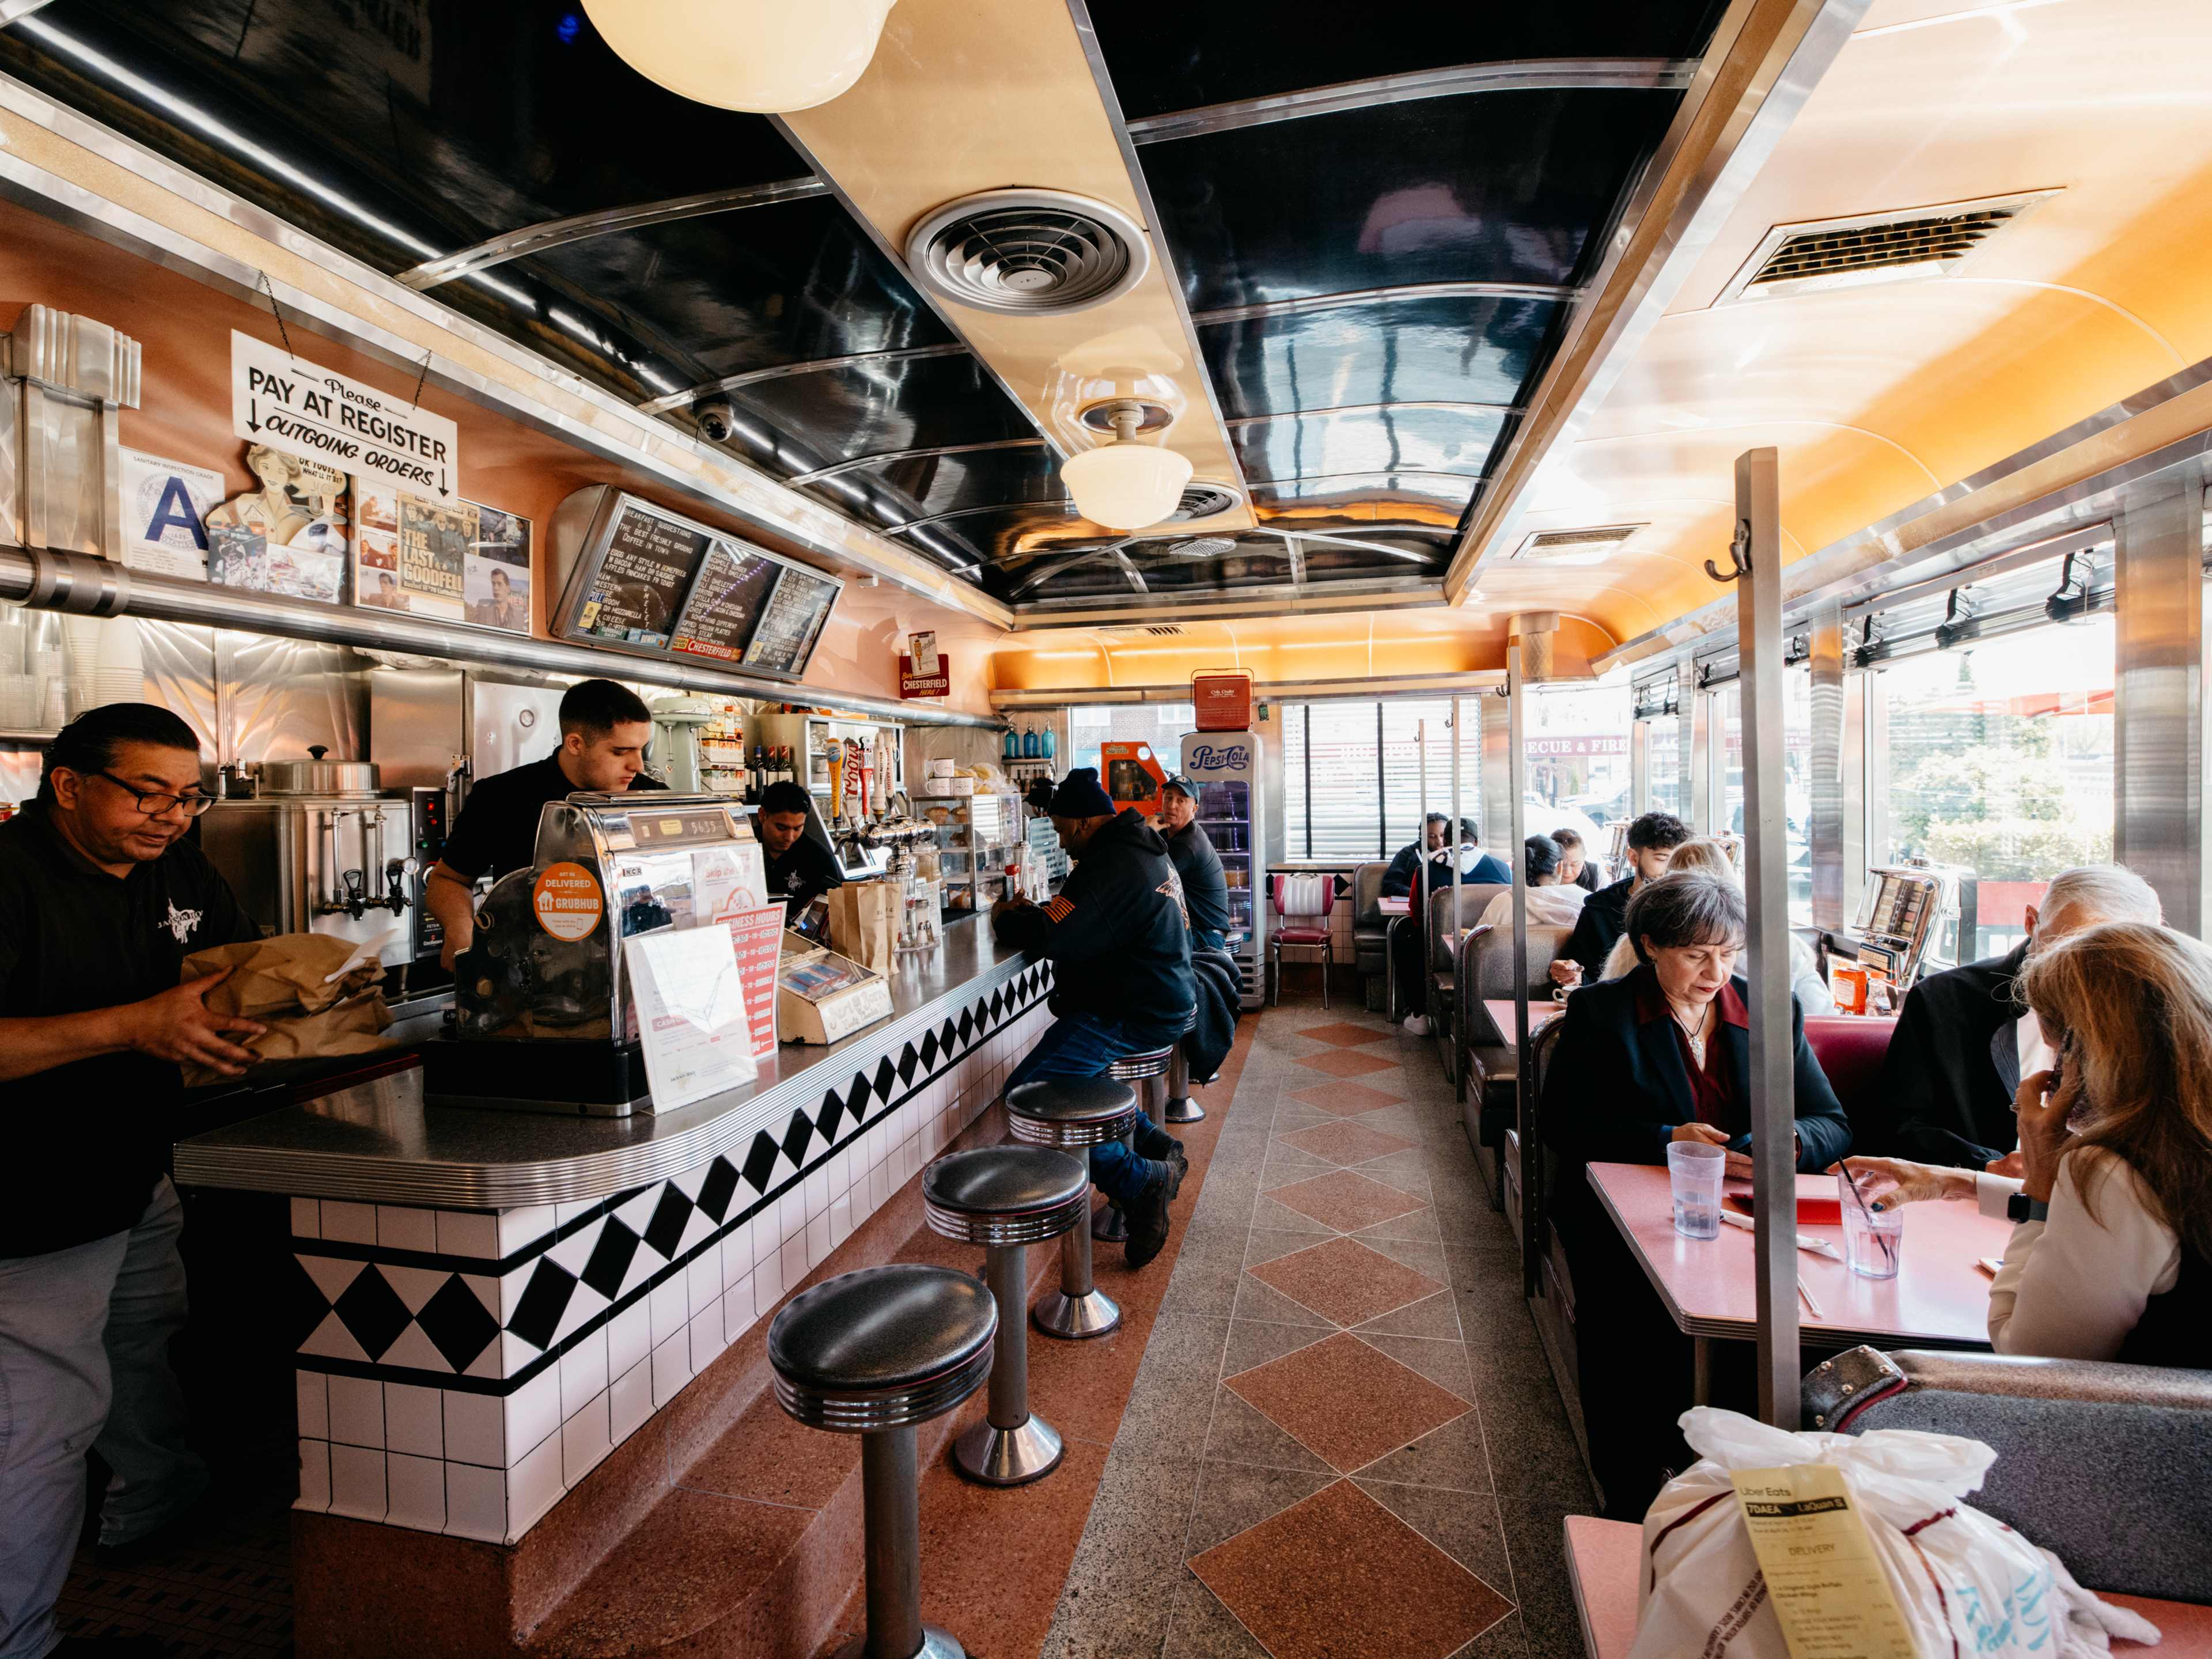 Diners and staff inside Jackson Hole during the daytime.